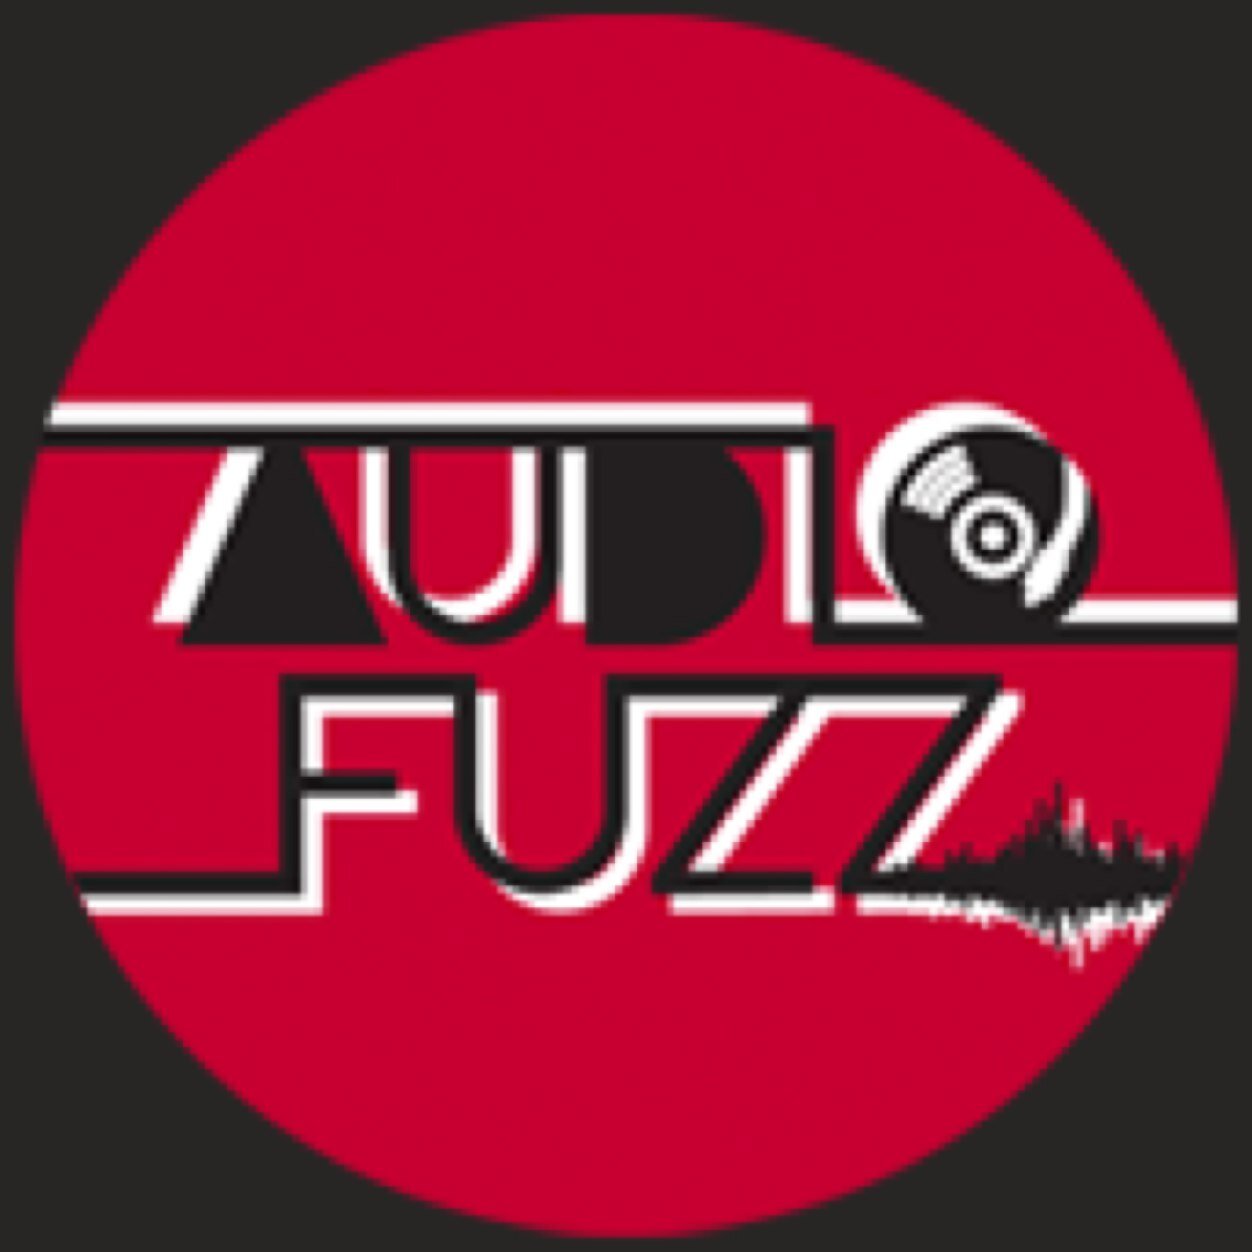 AudioFuzz brings you all the good #music you're not hearing! We review it, analyze it, & have fun with it! ChrisRyan@AudioFuzz.com